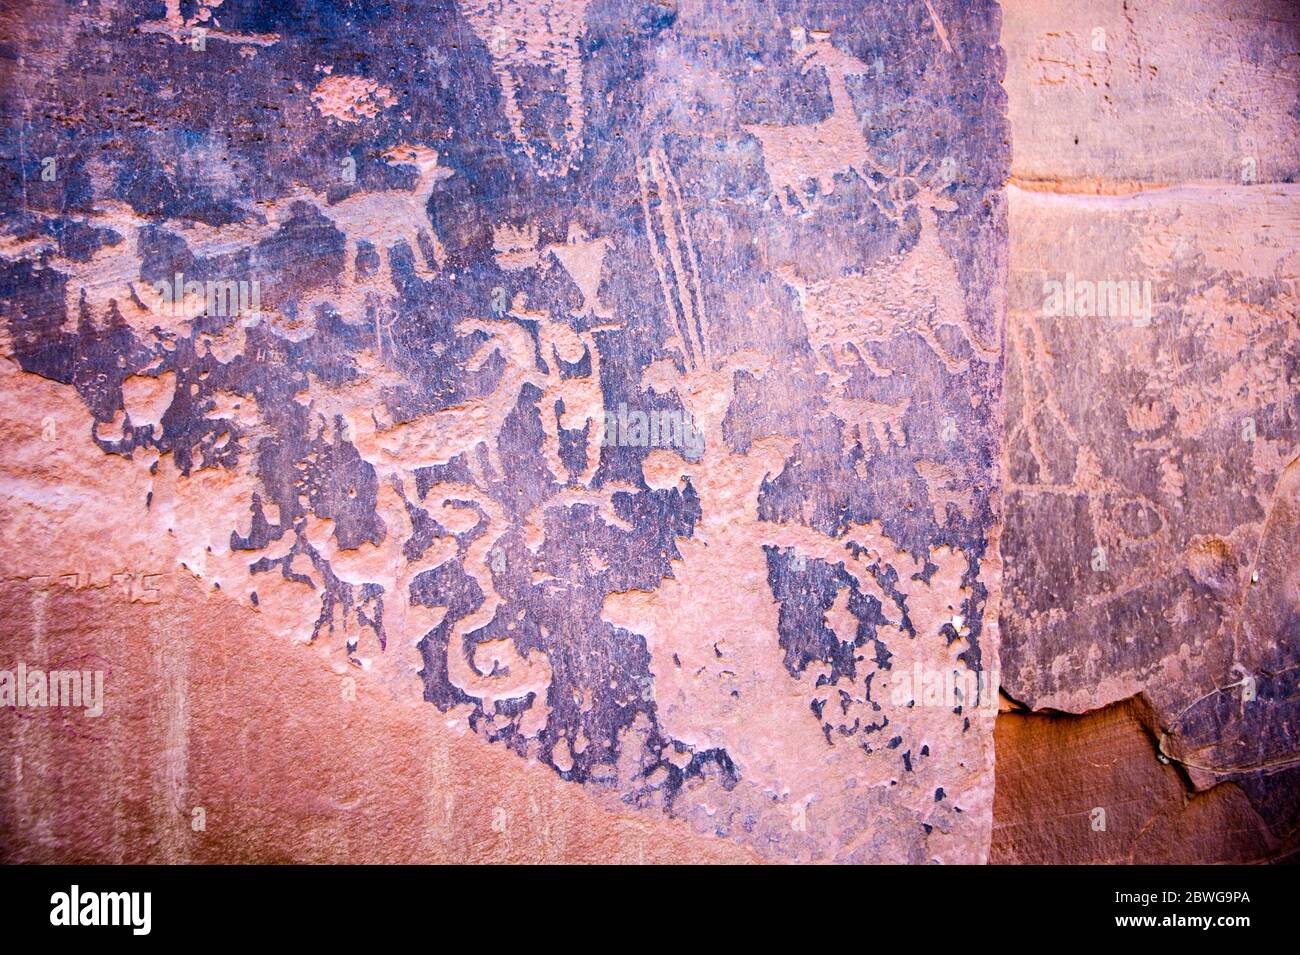 View of stone carving, Moab, Utah, USA Stock Photo